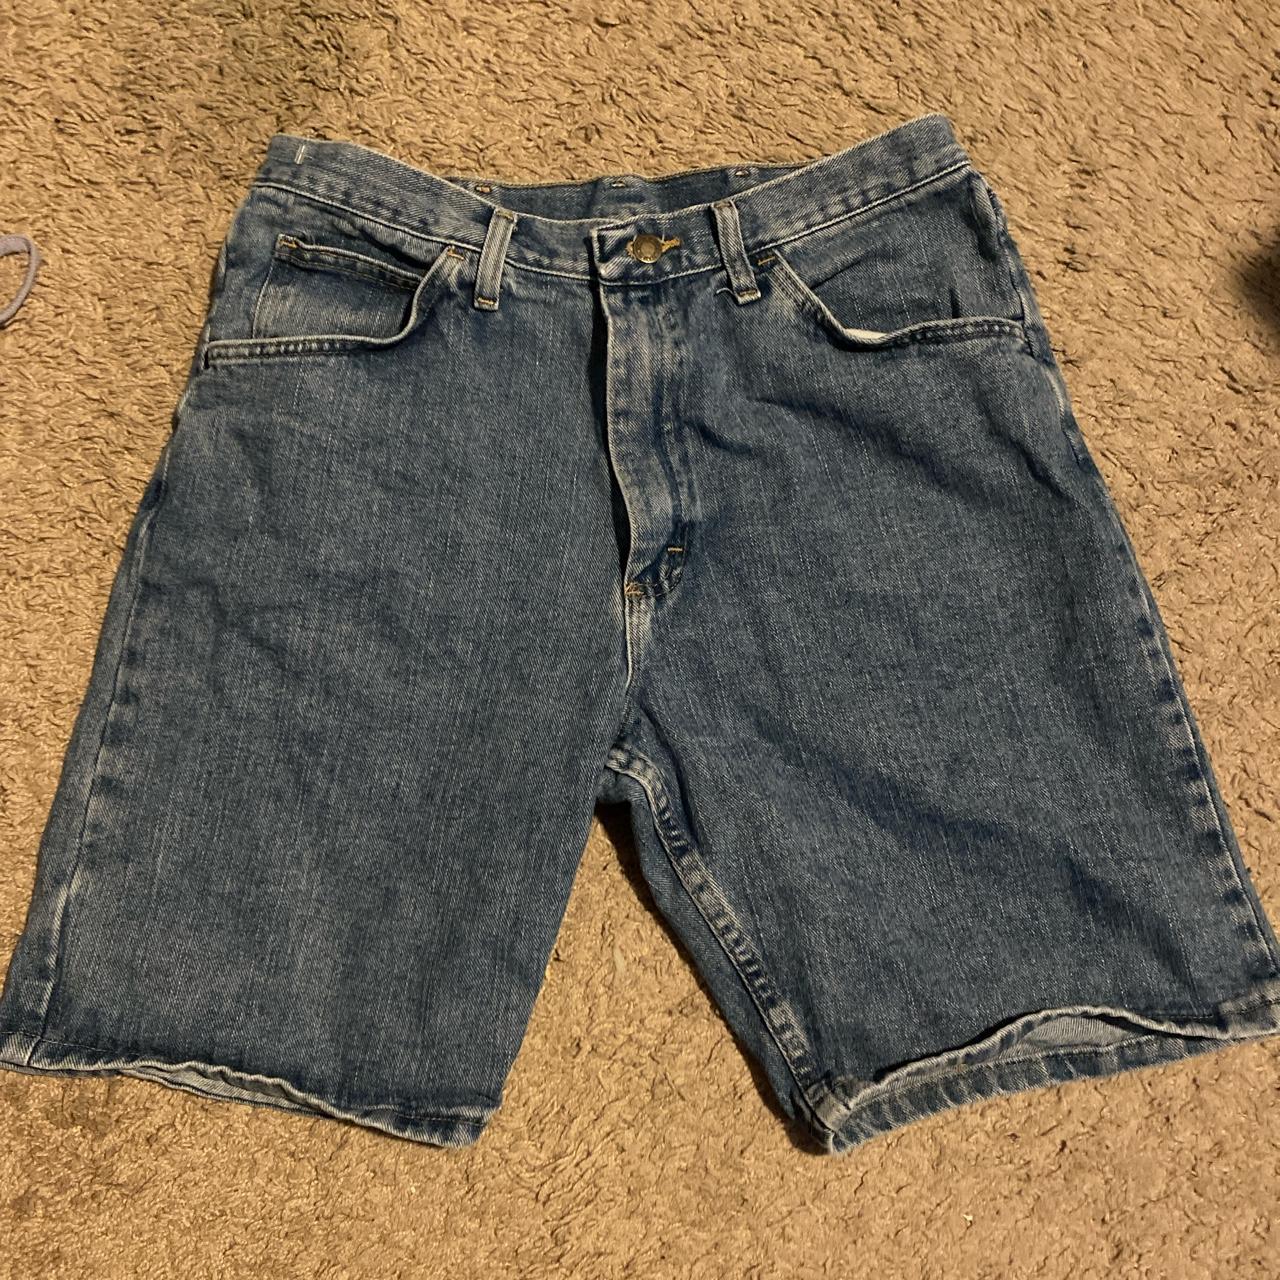 Wrangler jorts thrifted but no stains or rips,... - Depop